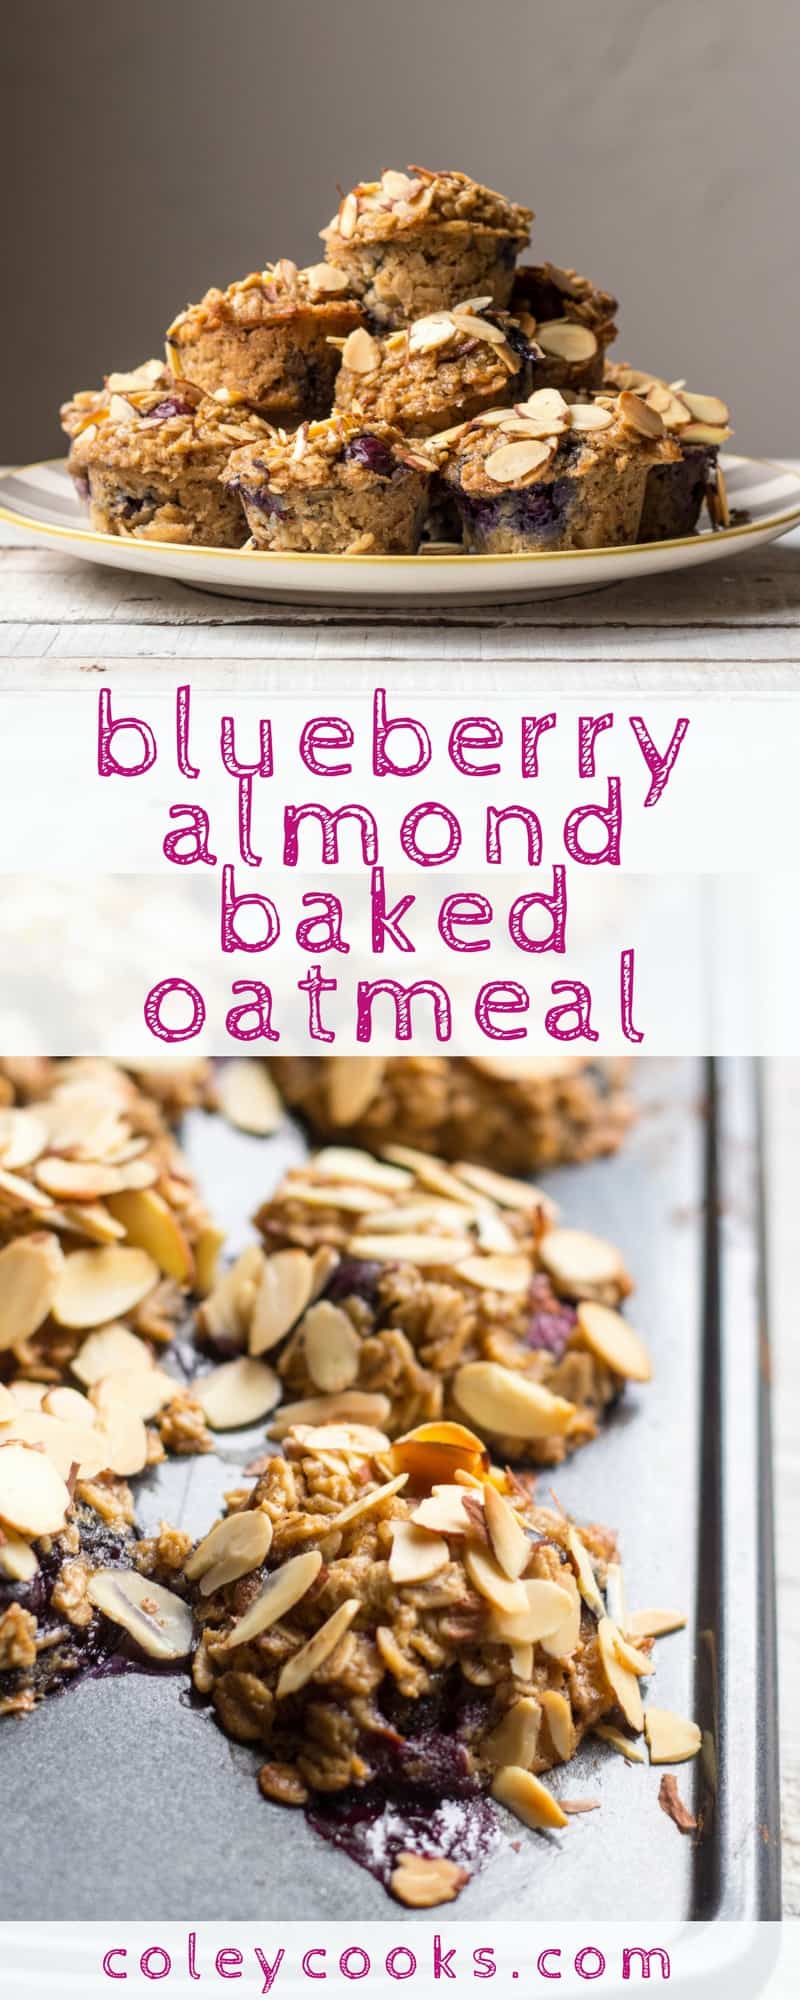 BLUEBERRY ALMOND BAKED OATMEAL | This baked oatmeal recipe is an easy and nutritious breakfast to take on the go! These little baked oatmeal bites are gluten free, dairy free, loaded with blueberries, and taste amazing! | ColeyCooks.com